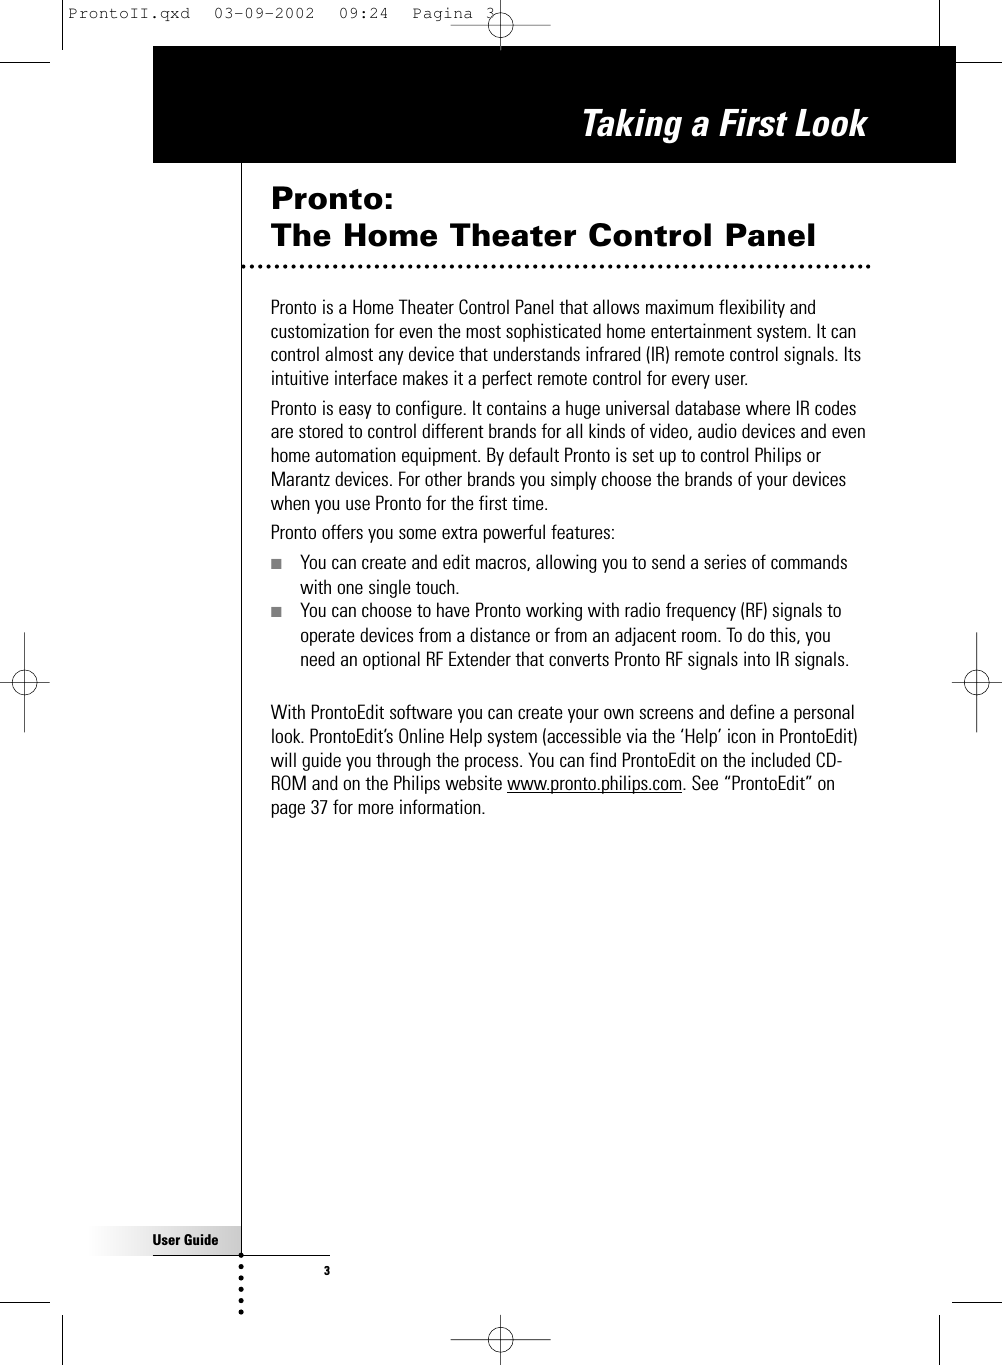 User Guide3Taking a First LookPronto: The Home Theater Control PanelPronto is a Home Theater Control Panel that allows maximum flexibility andcustomization for even the most sophisticated home entertainment system. It cancontrol almost any device that understands infrared (IR) remote control signals. Itsintuitive interface makes it a perfect remote control for every user.Pronto is easy to configure. It contains a huge universal database where IR codesare stored to control different brands for all kinds of video, audio devices and evenhome automation equipment. By default Pronto is set up to control Philips orMarantz devices. For other brands you simply choose the brands of your deviceswhen you use Pronto for the first time.Pronto offers you some extra powerful features:■You can create and edit macros, allowing you to send a series of commandswith one single touch.■You can choose to have Pronto working with radio frequency (RF) signals tooperate devices from a distance or from an adjacent room. To do this, youneed an optional RF Extender that converts Pronto RF signals into IR signals.With ProntoEdit software you can create your own screens and define a personallook. ProntoEdit’s Online Help system (accessible via the ‘Help’ icon in ProntoEdit)will guide you through the process. You can find ProntoEdit on the included CD-ROM and on the Philips website www.pronto.philips.com. See “ProntoEdit” onpage 37 for more information.ProntoII.qxd  03-09-2002  09:24  Pagina 3